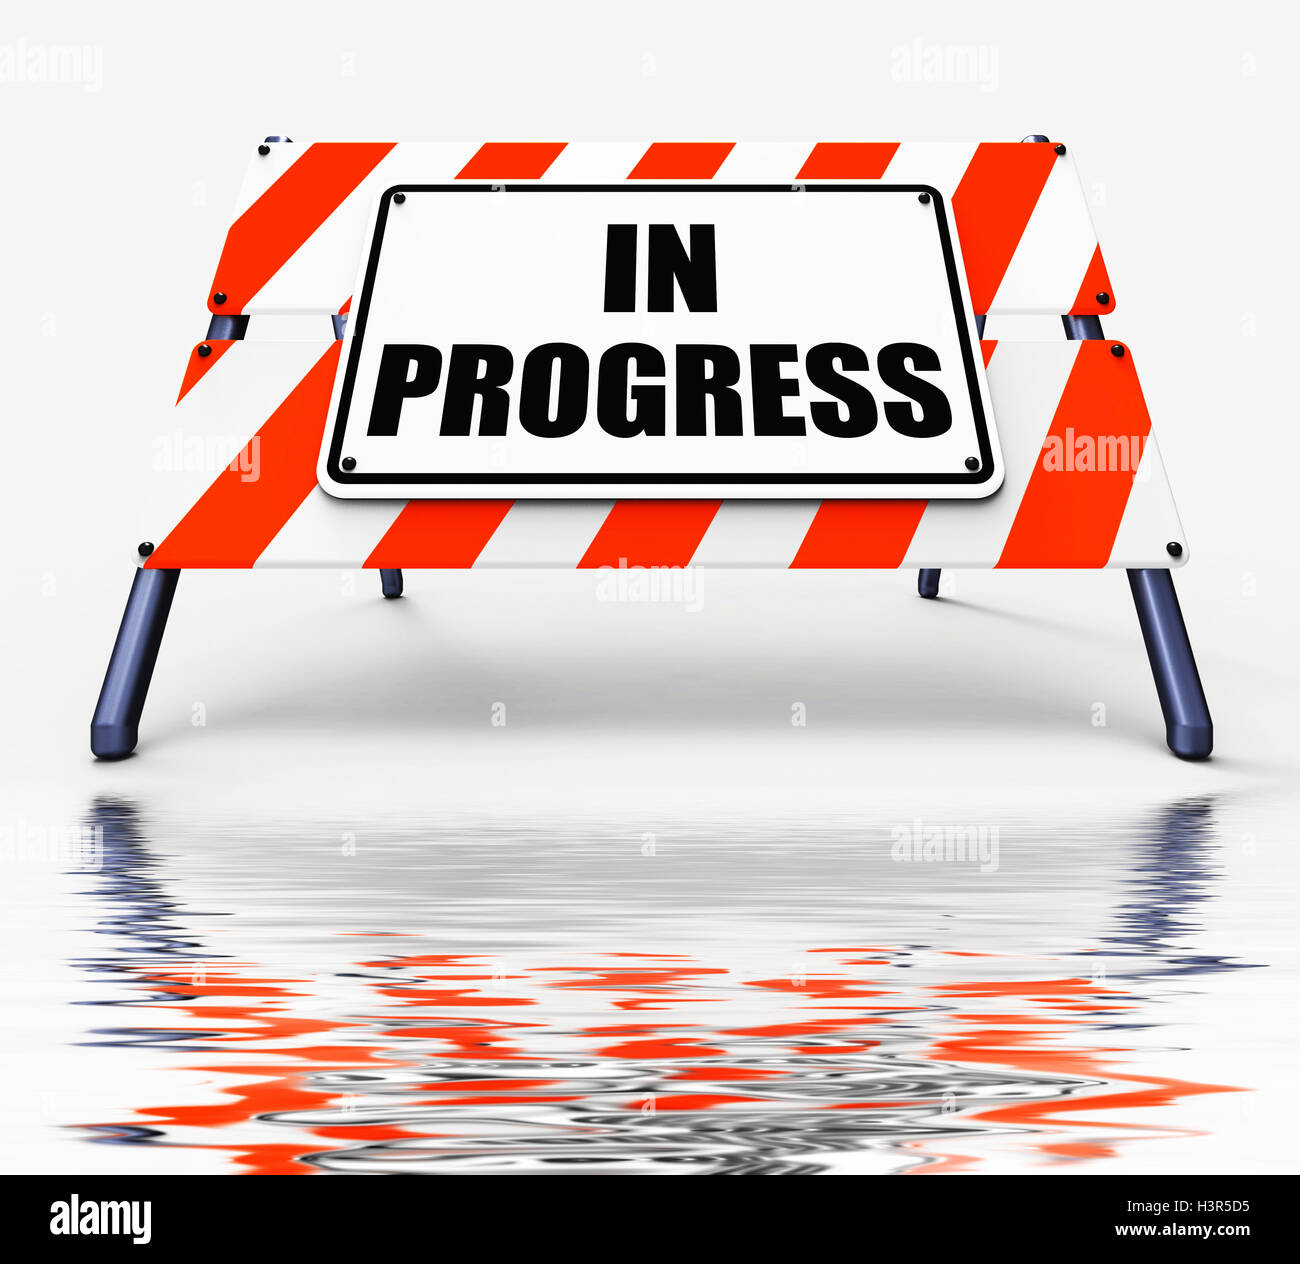 In Progress Sign Displays Ongoing or Happening Now Stock Photo